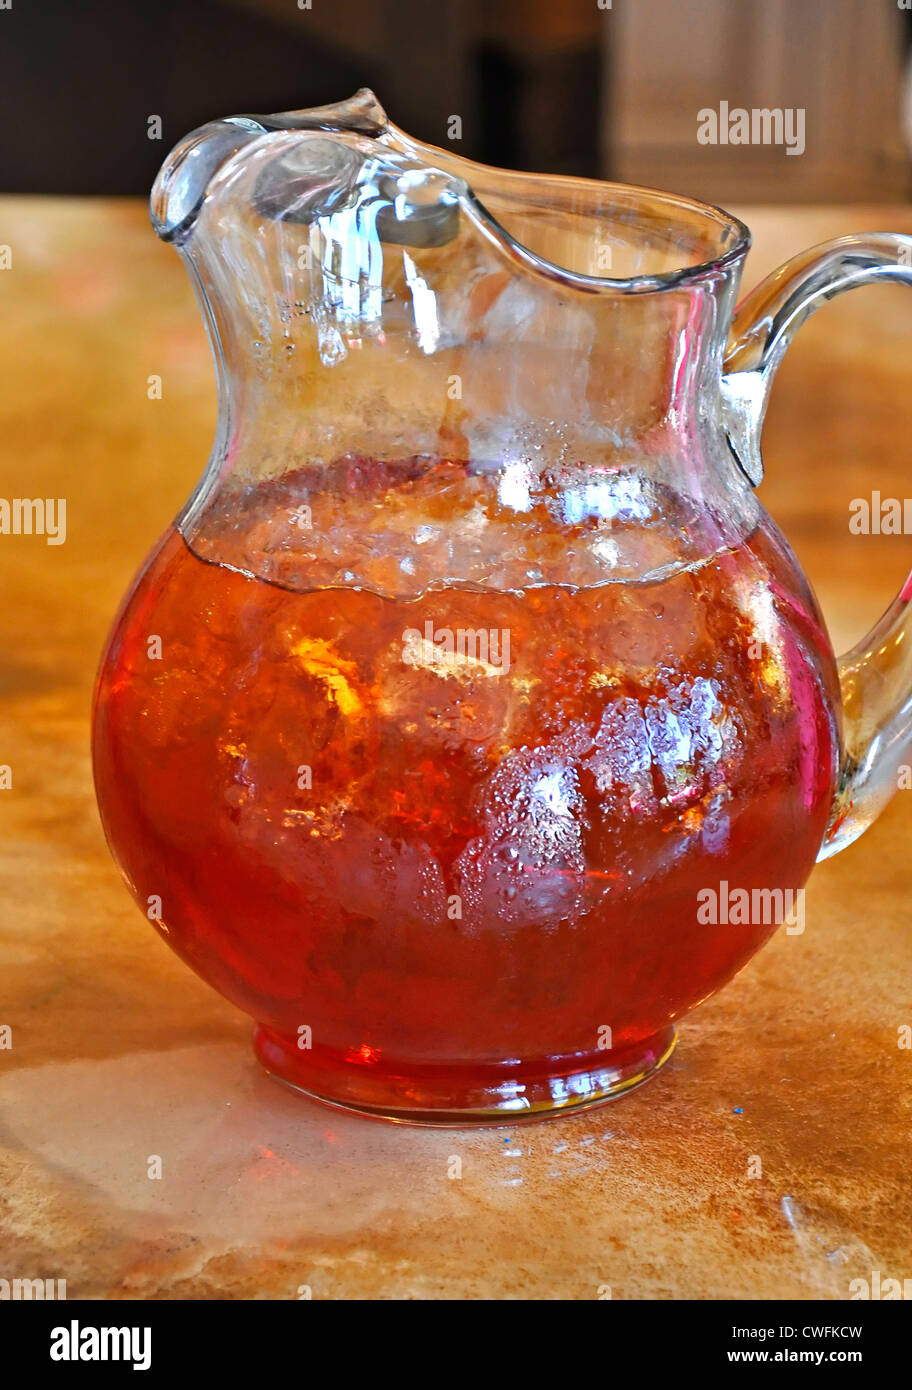 https://c8.alamy.com/comp/CWFKCW/this-is-a-vertical-stock-image-of-a-tall-glass-pitcher-of-iced-tea-CWFKCW.jpg